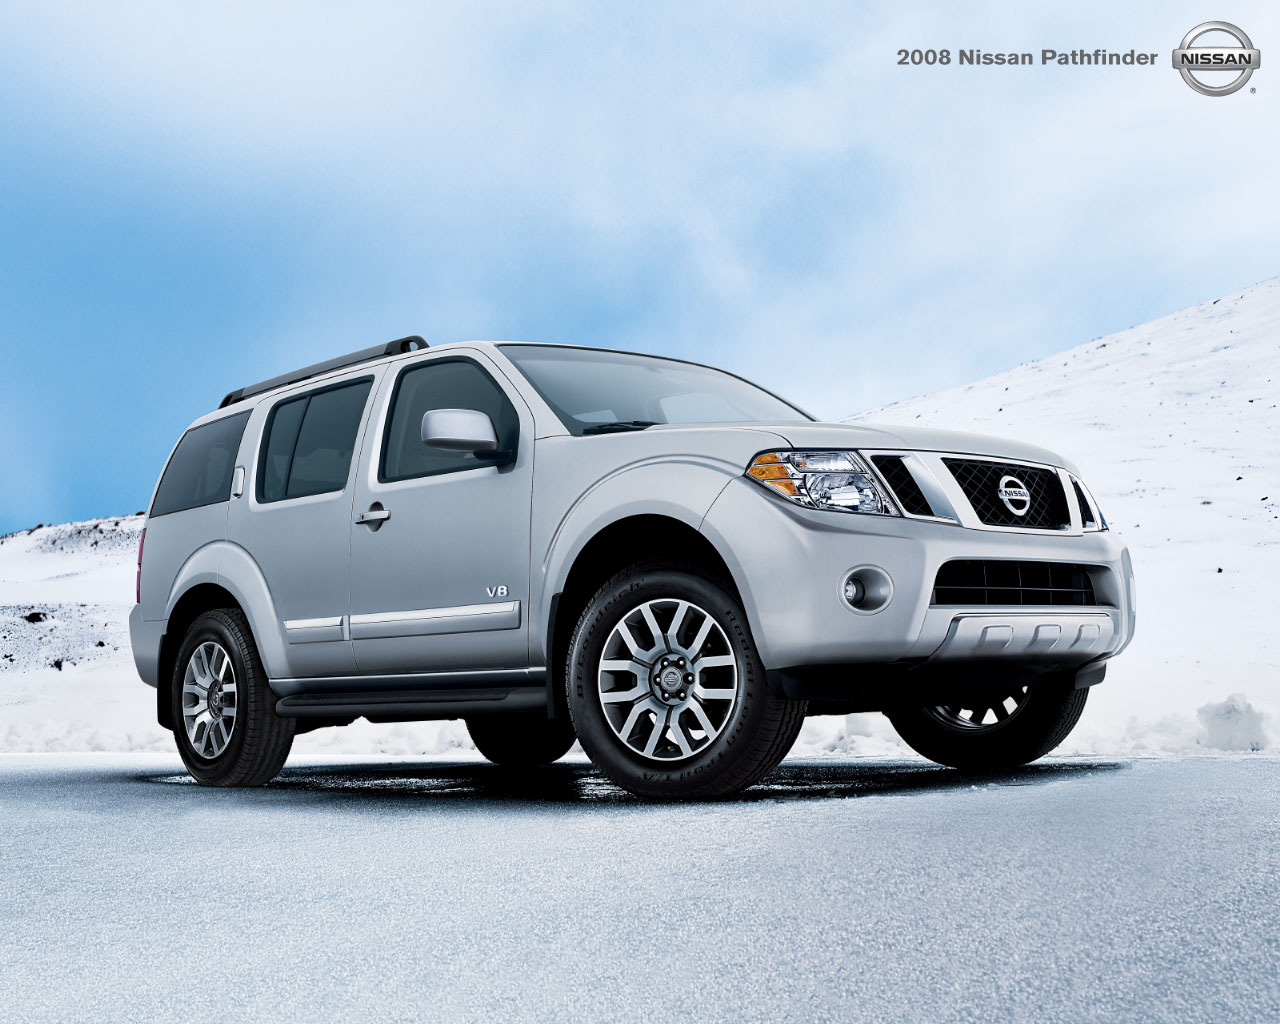 Reviews, News, Thoughts - Everything Cars: Wallpapers: Nissan Pathfinder